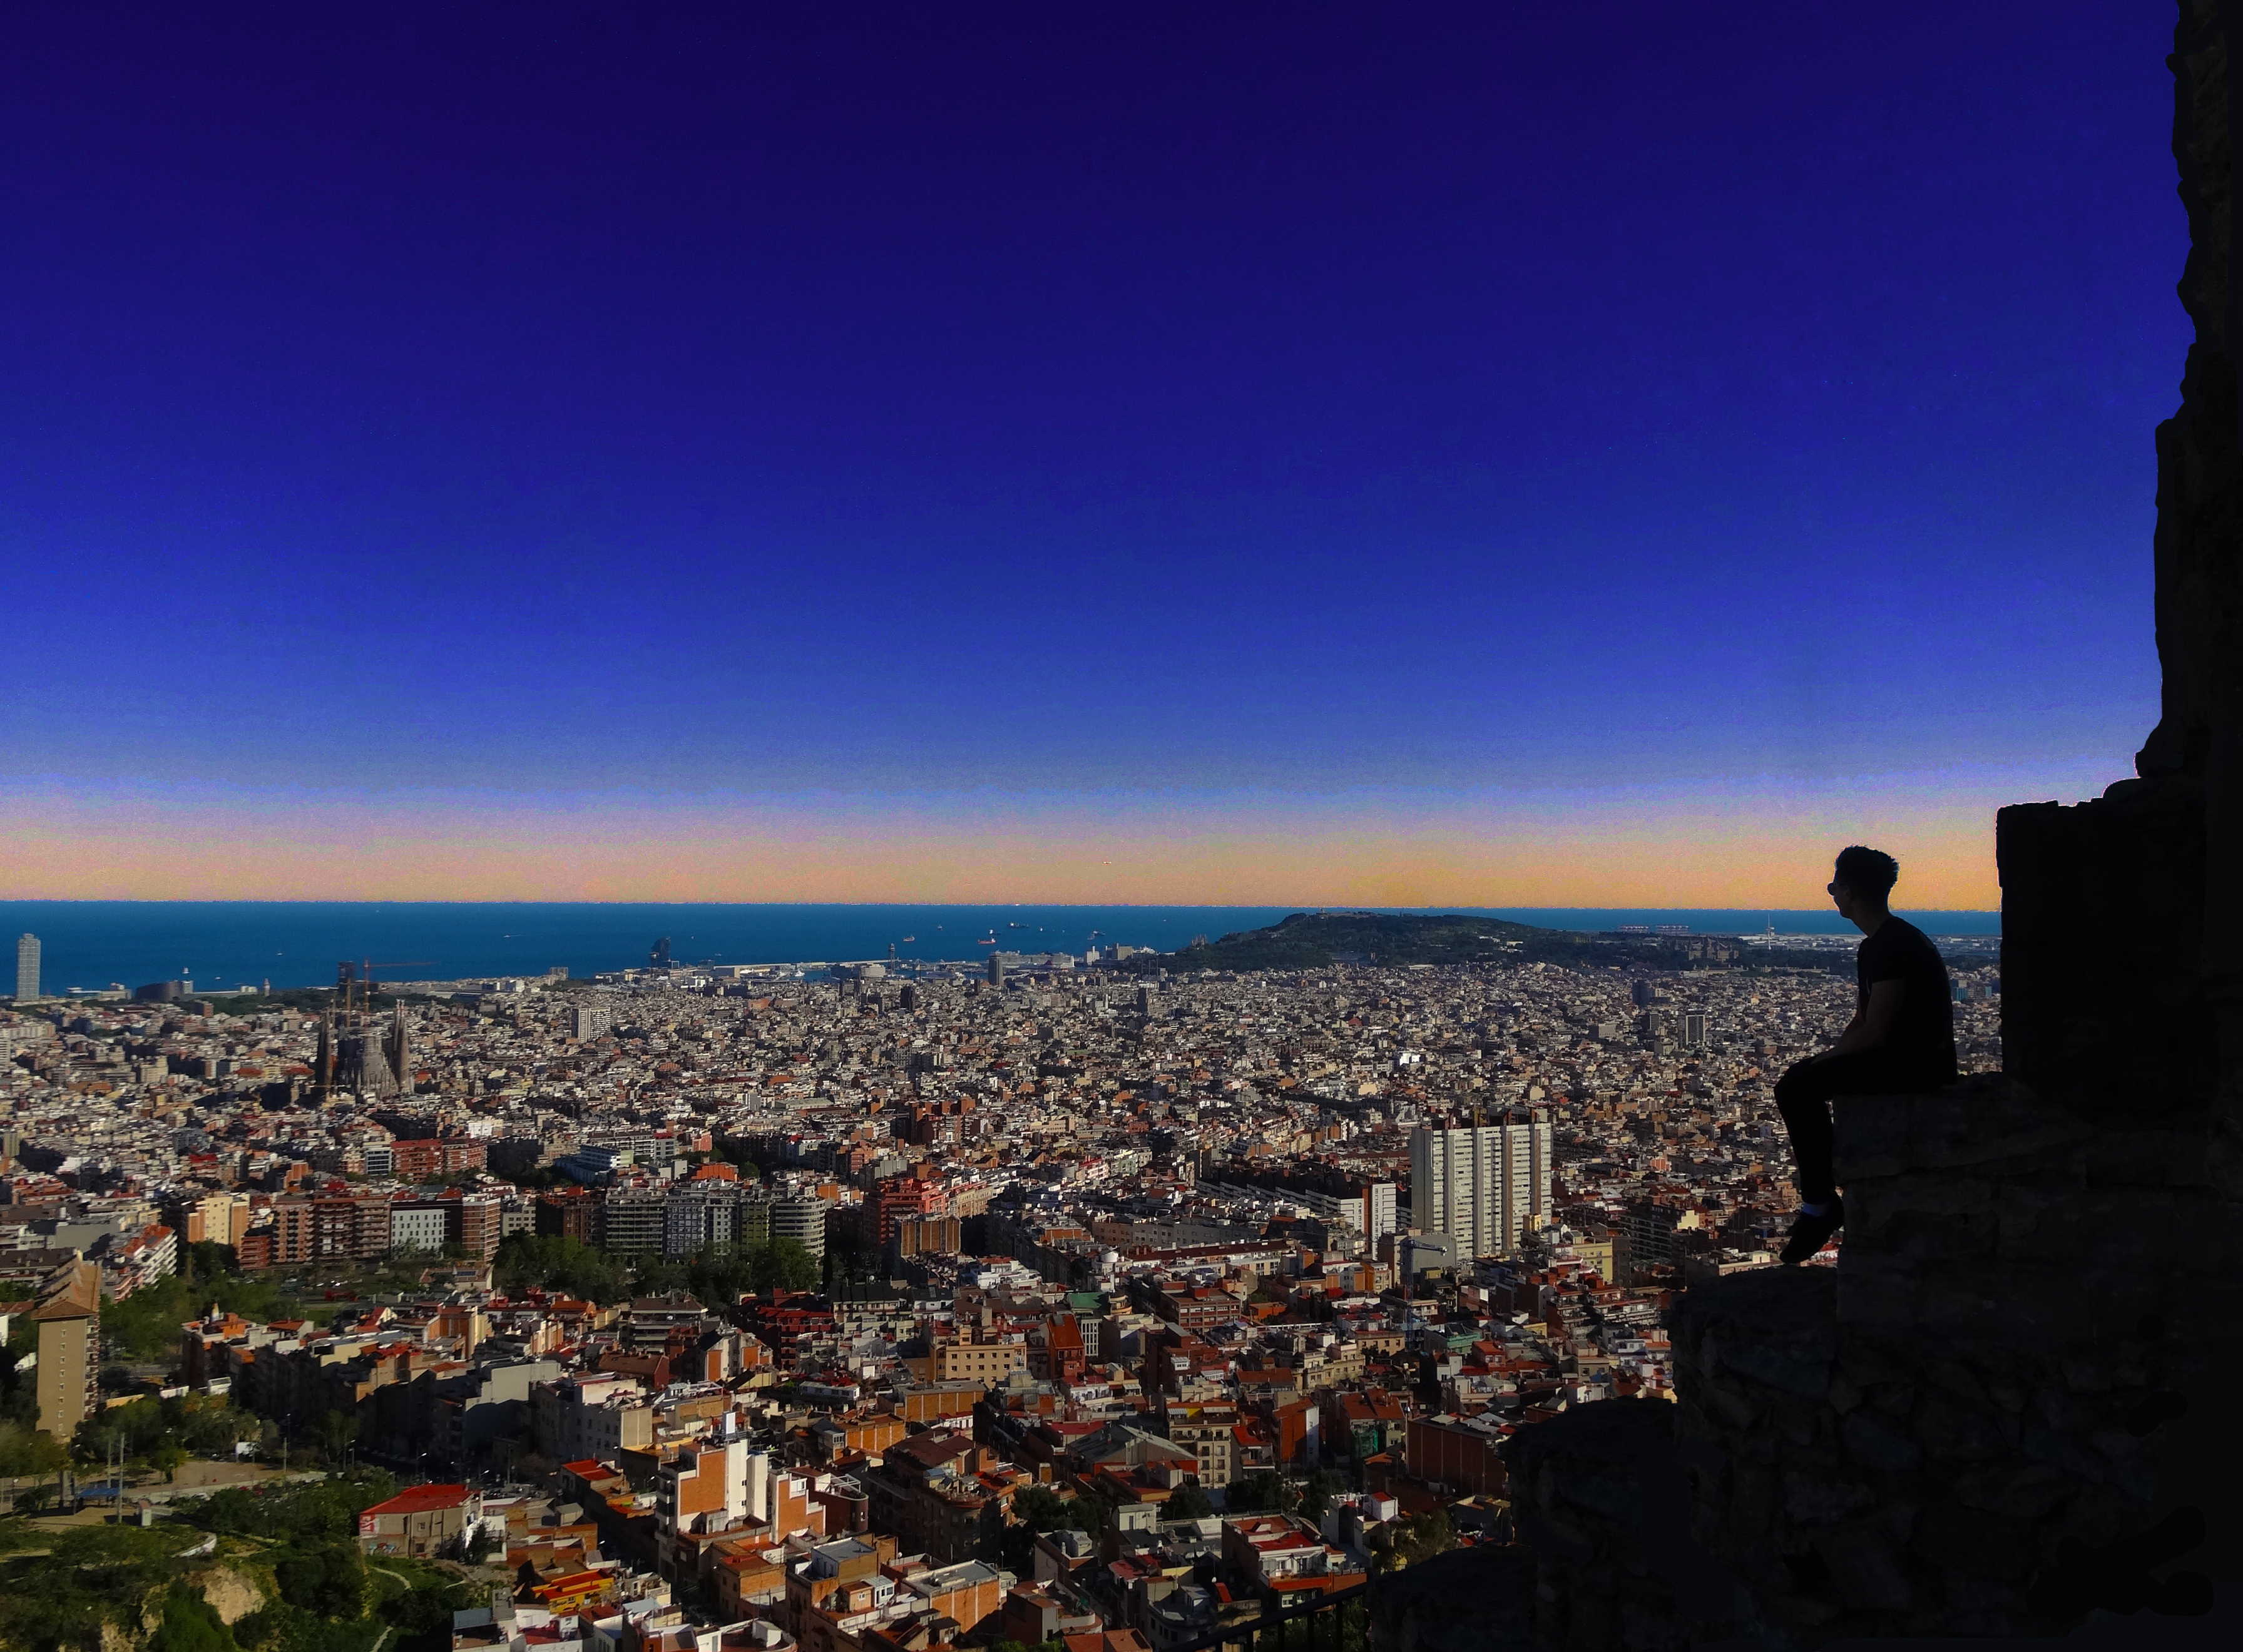 A person sat high up on a wall, looking out over a city skyline and the sea. 